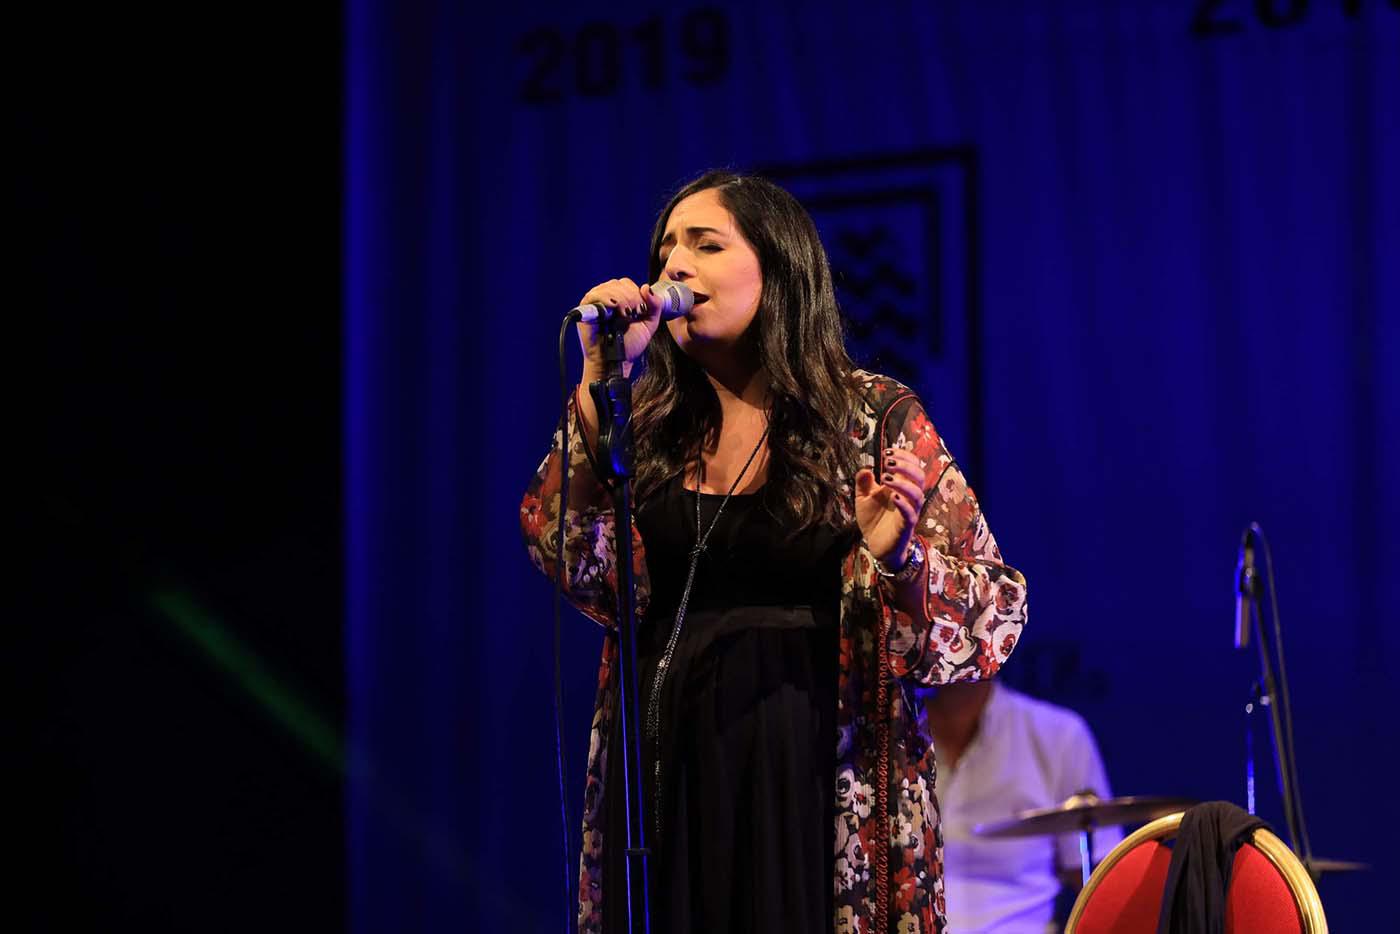 Nabyla Maan, a raw talent with a mesmerising voice